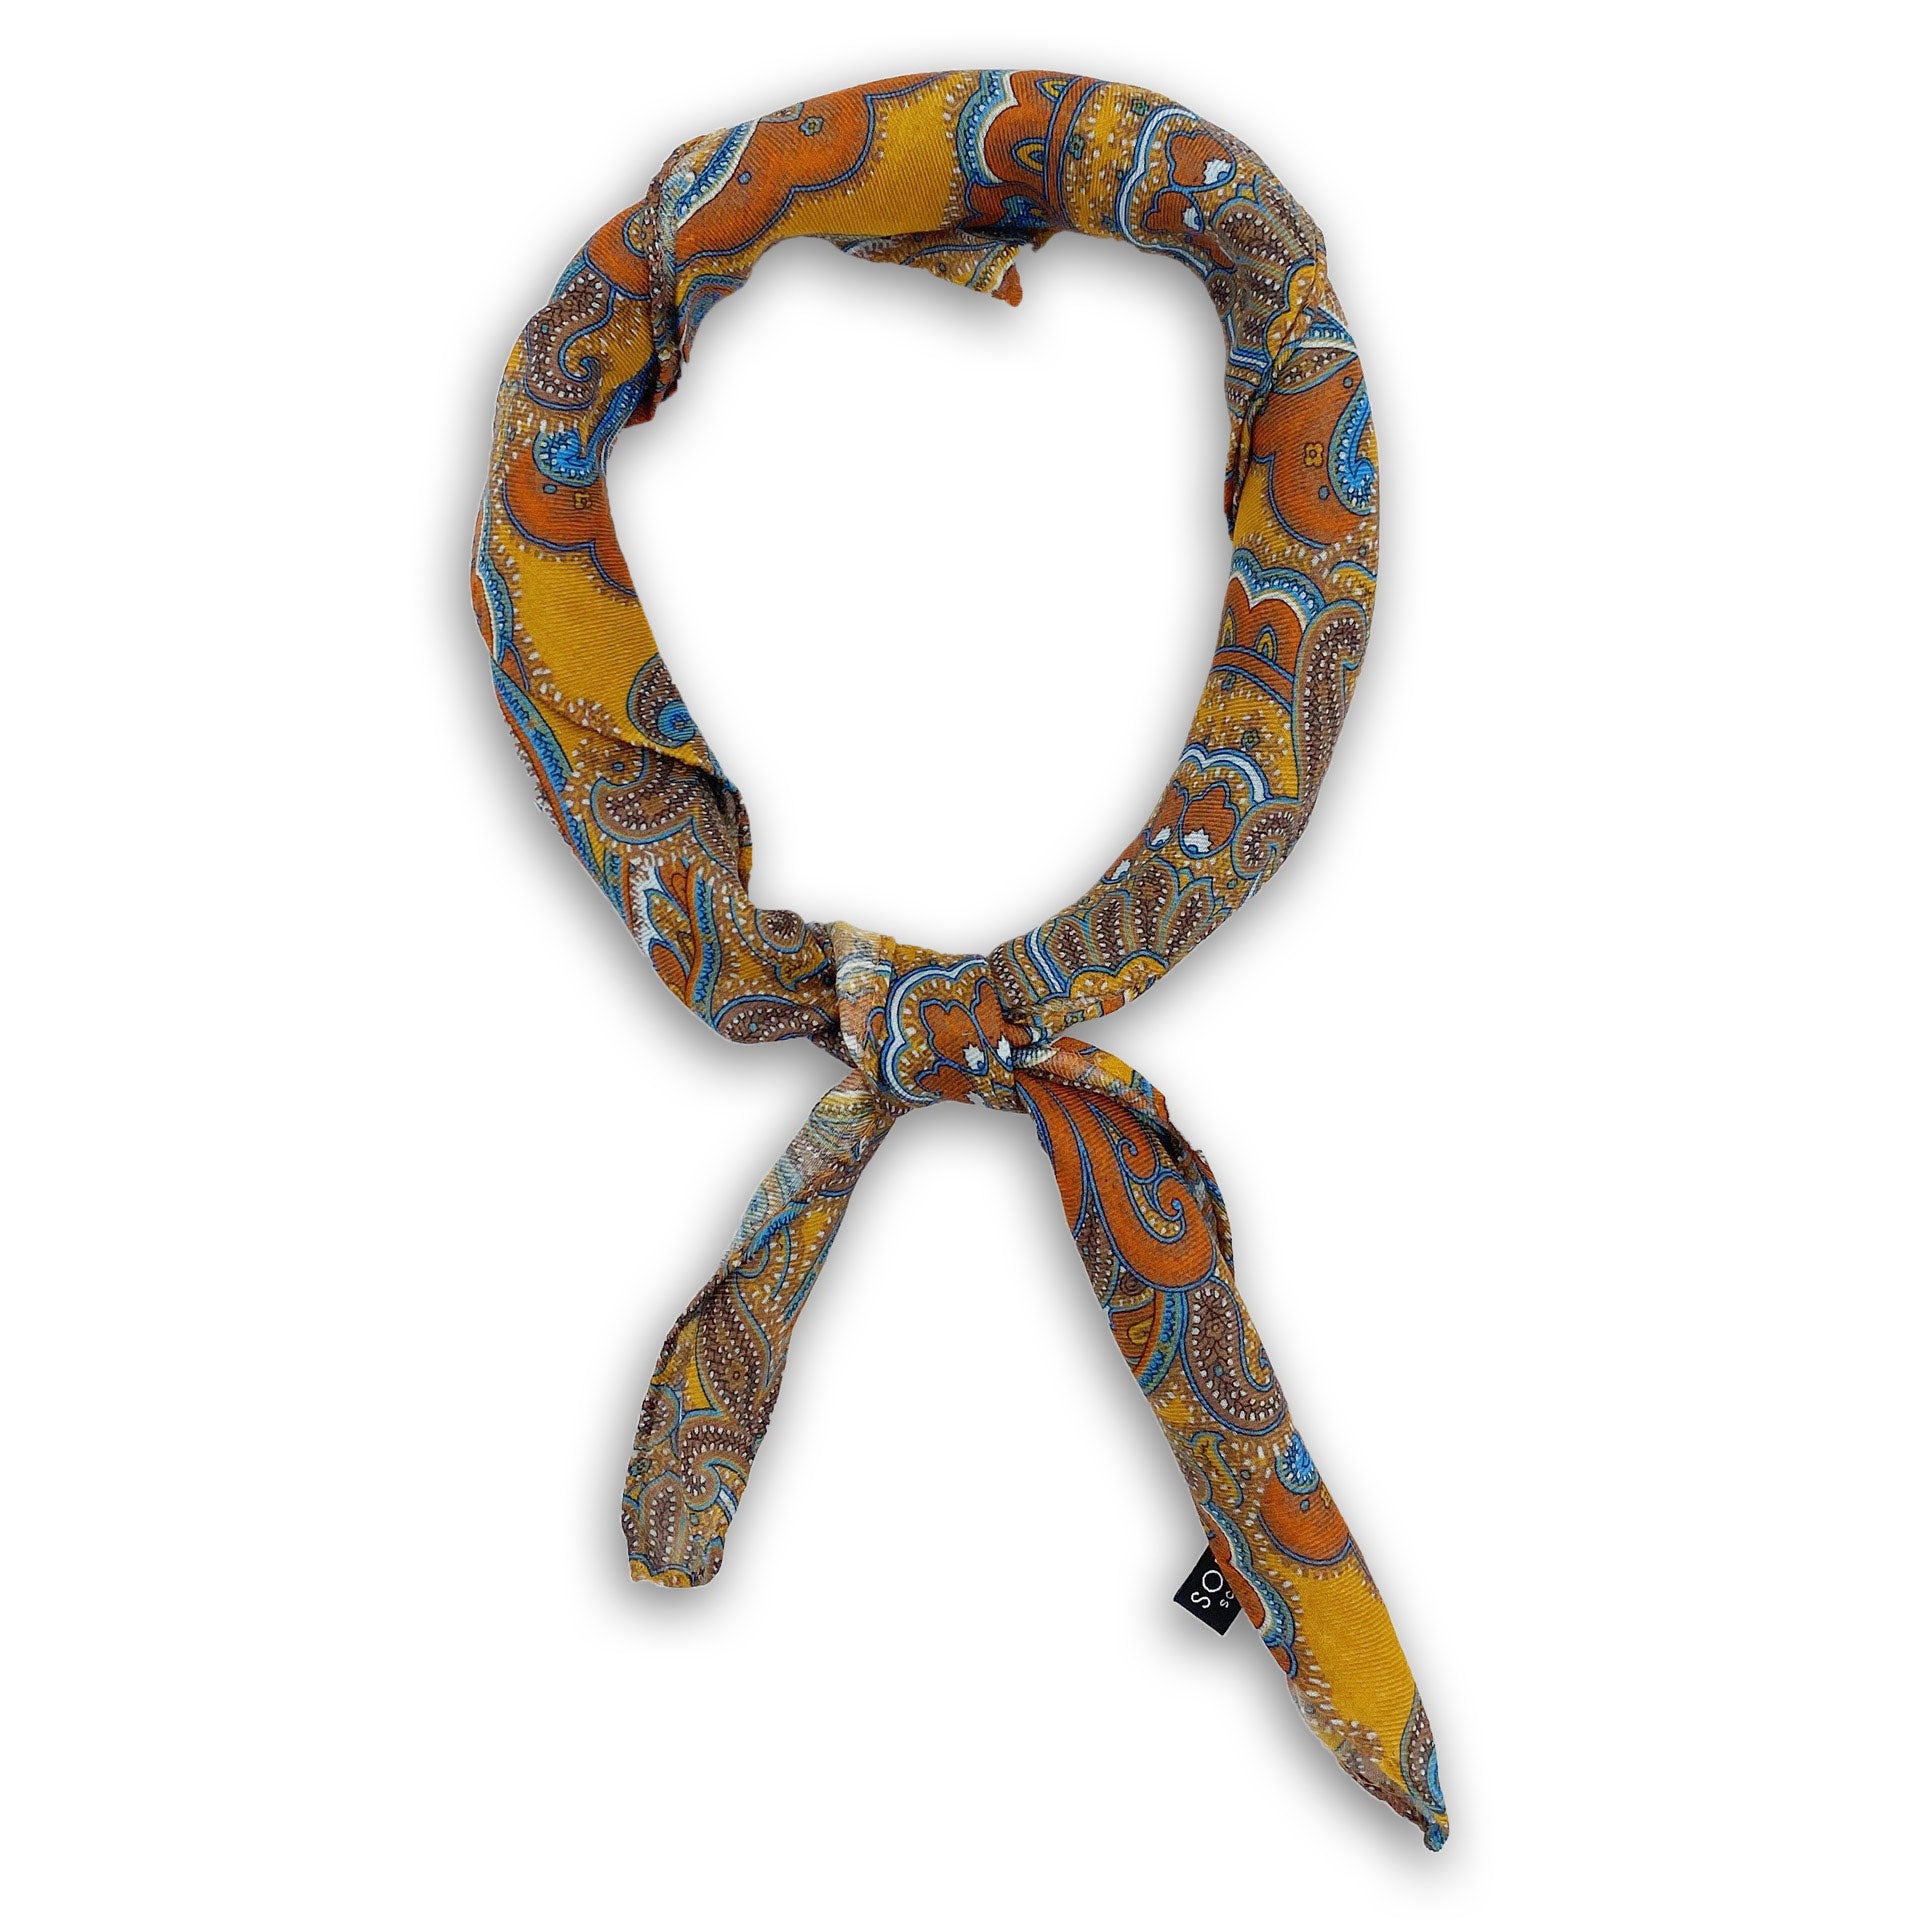 'The Carnaby' orange, brown and blue paisley patterened bandana on a gold-yellow background. Knotted into a loop on a white background.